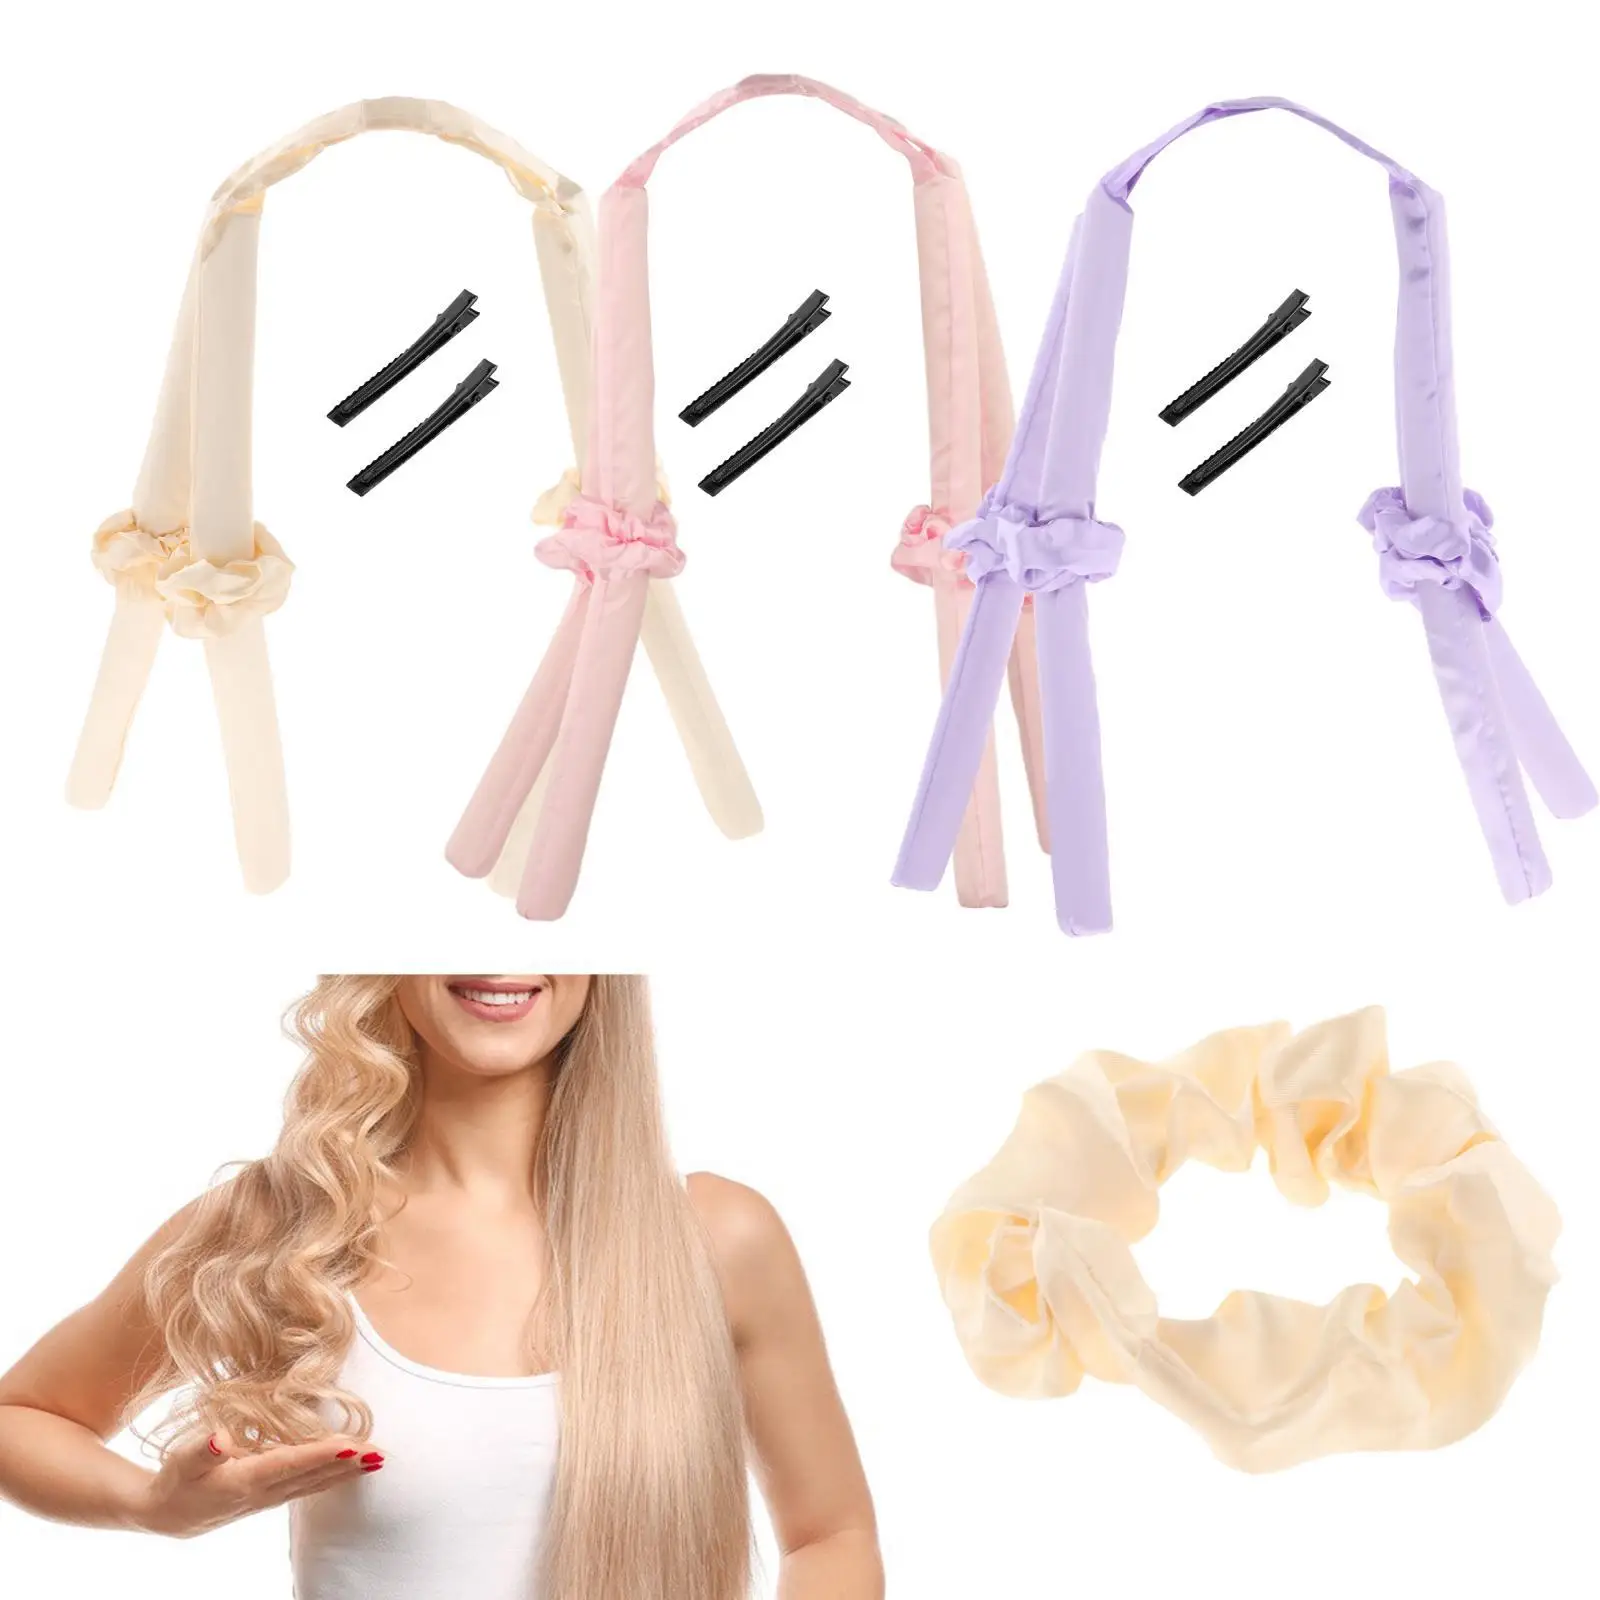 Heatless Curling Rod Headband, No Heat DIY Hair Styling Tool with Hair Clips No Damage Rods Curling Ribbon for Long Hair